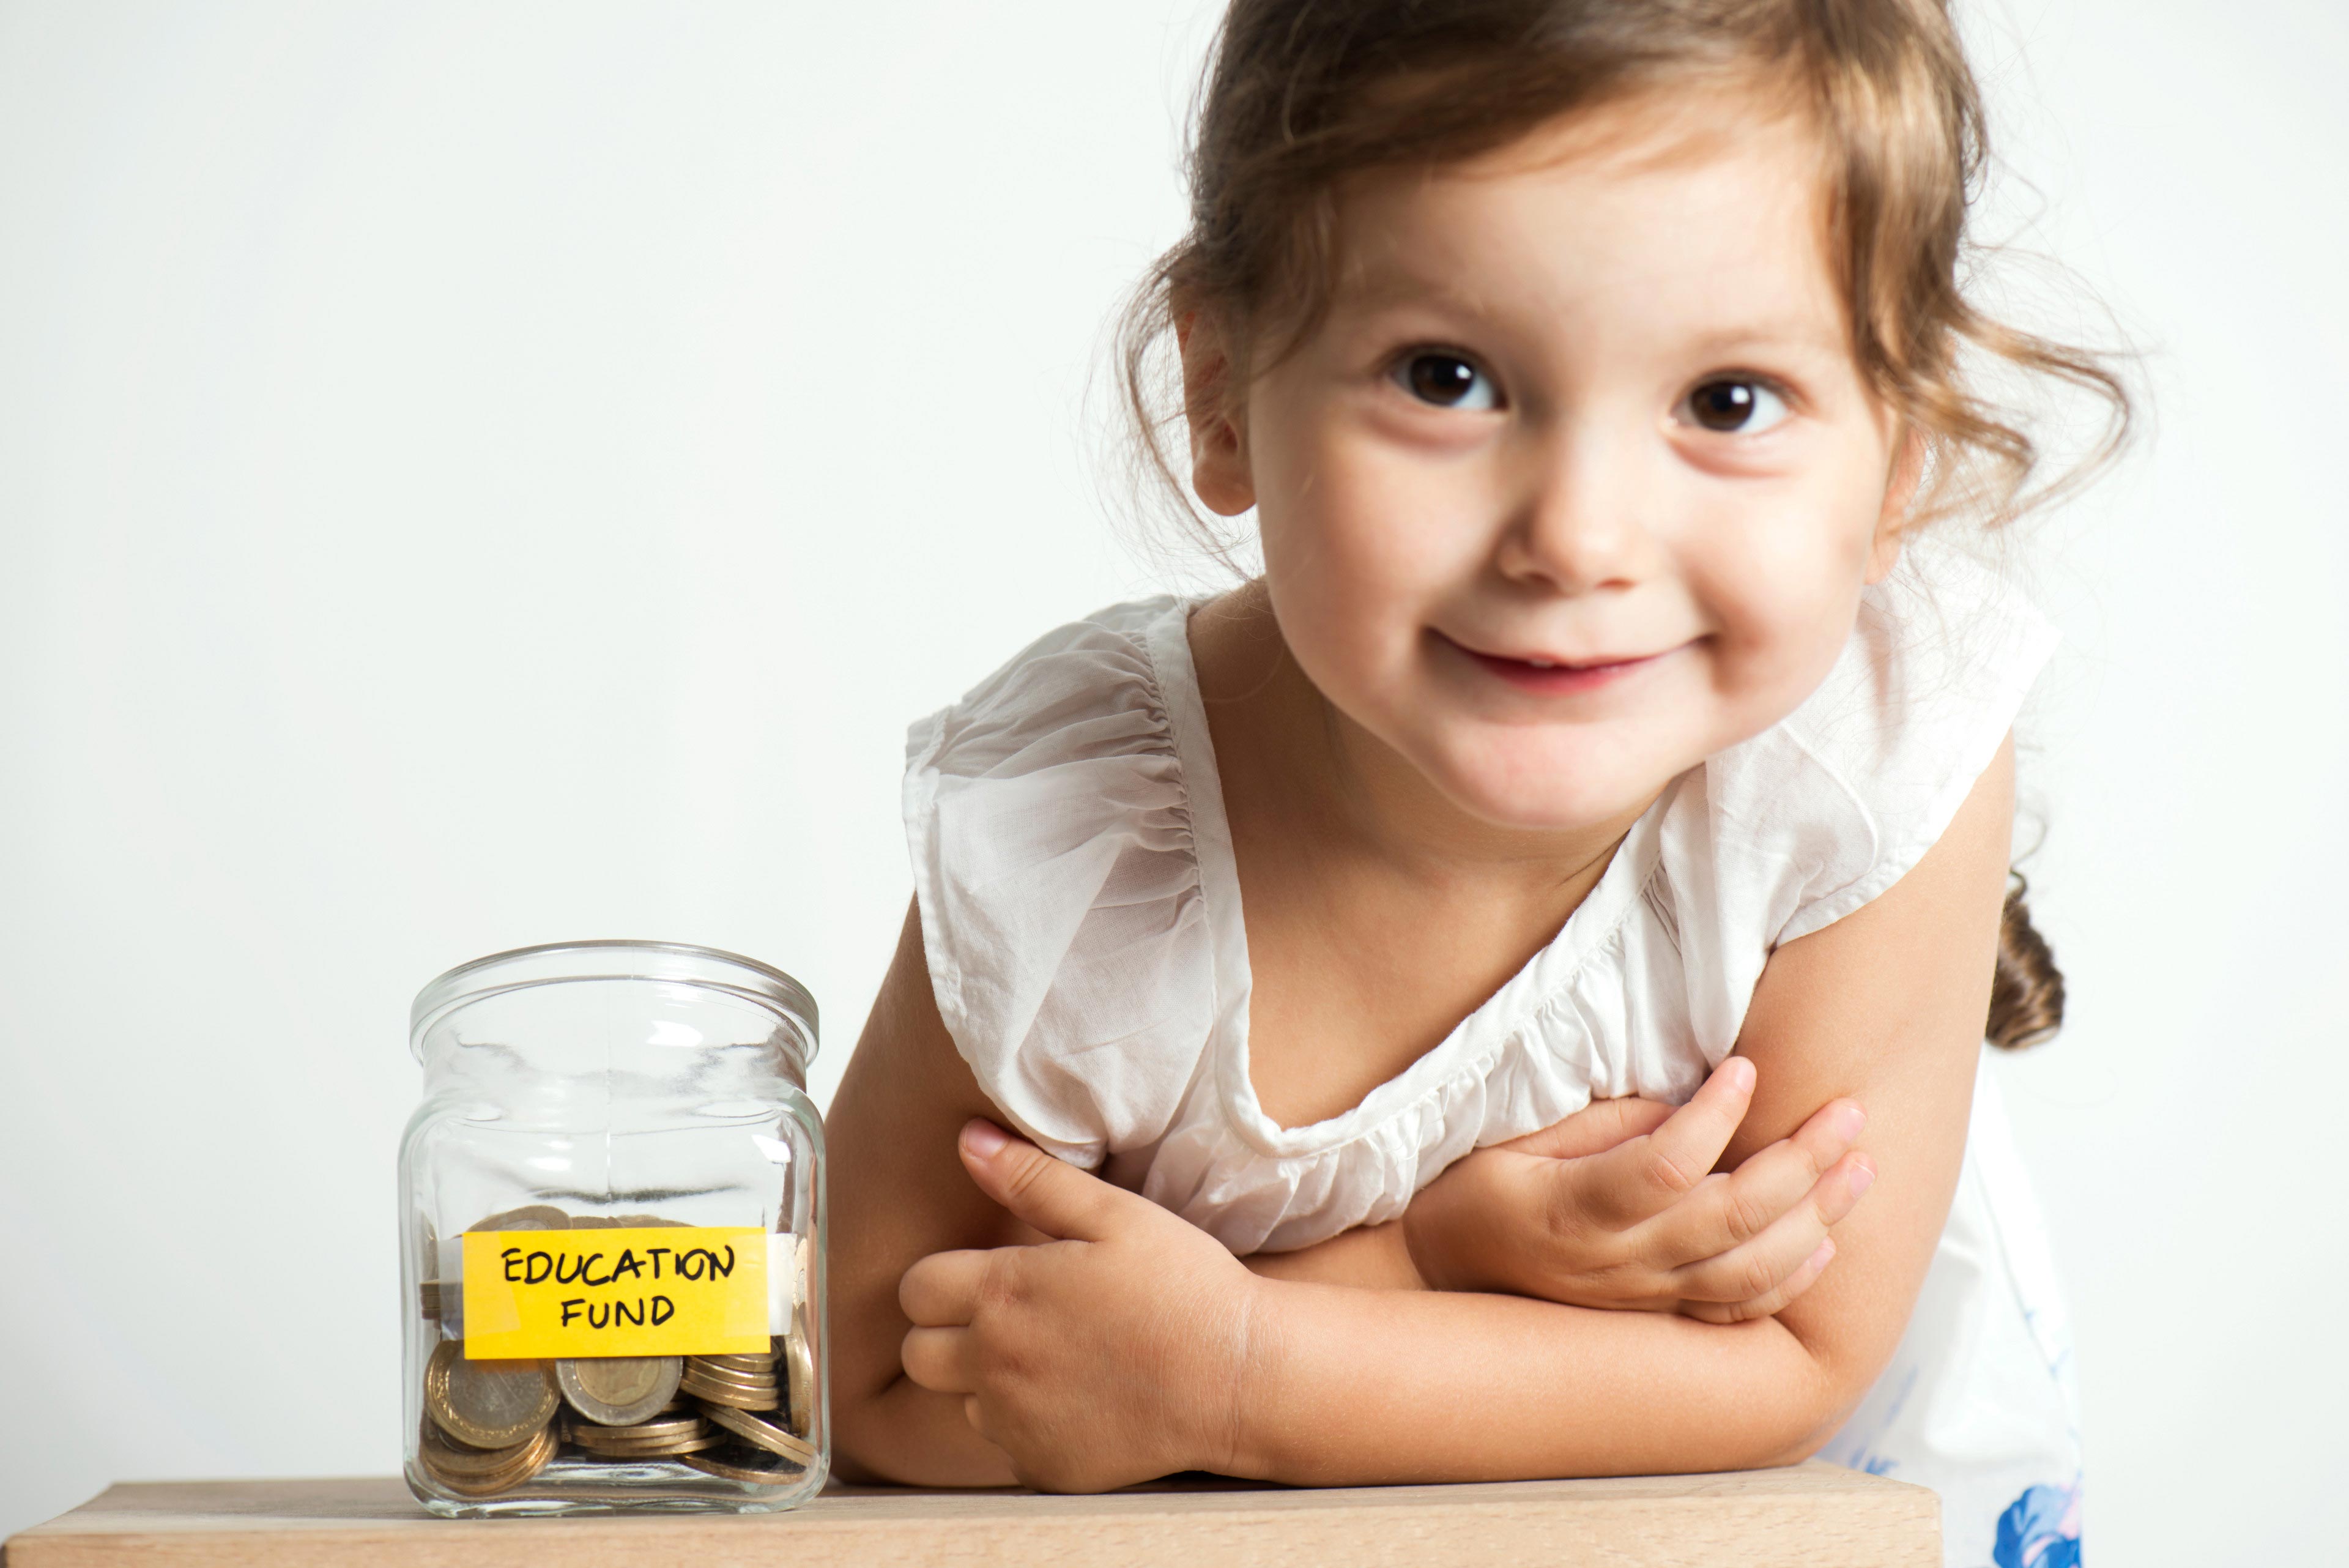 Little girl with coins in glass money jar with education fund label